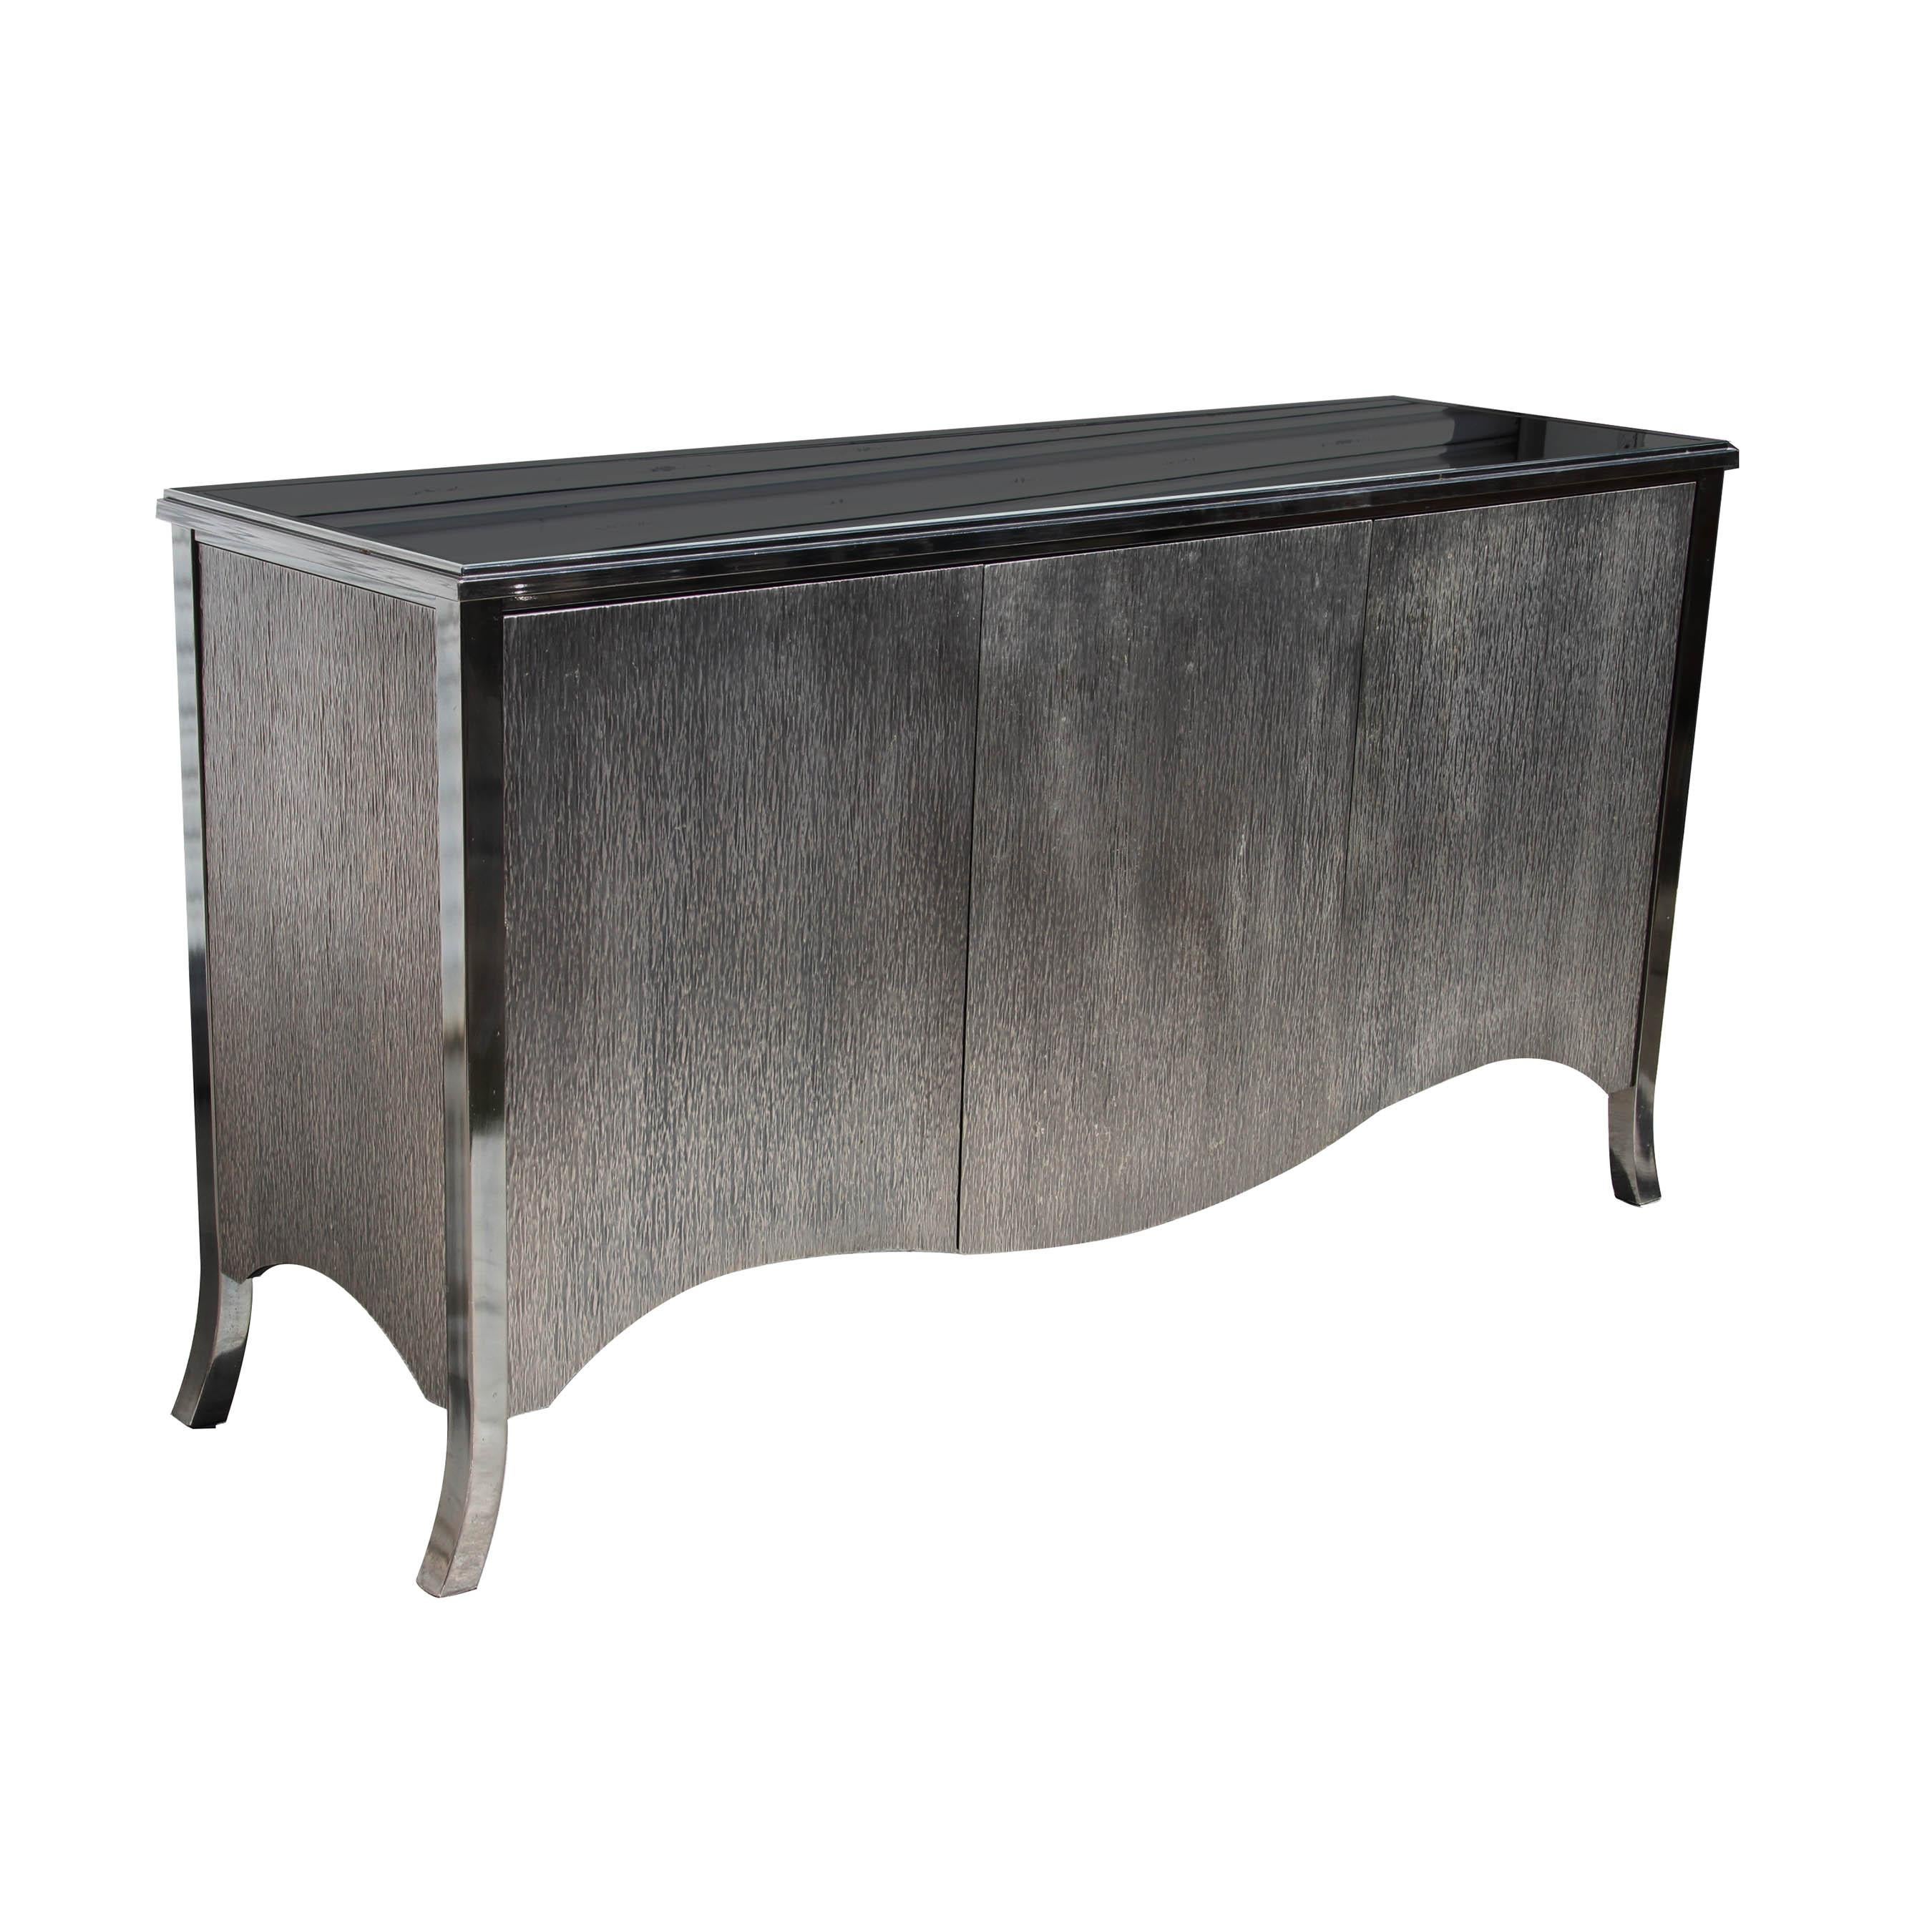 Design Institute America
2000s

Stunning three-door buffet has an inset black glass top and adjustable height interior shelves. The door fronts and sides are clad in heavy-gauge embossed steel. 


Overall dimensions: Width: 63 inches, Height: